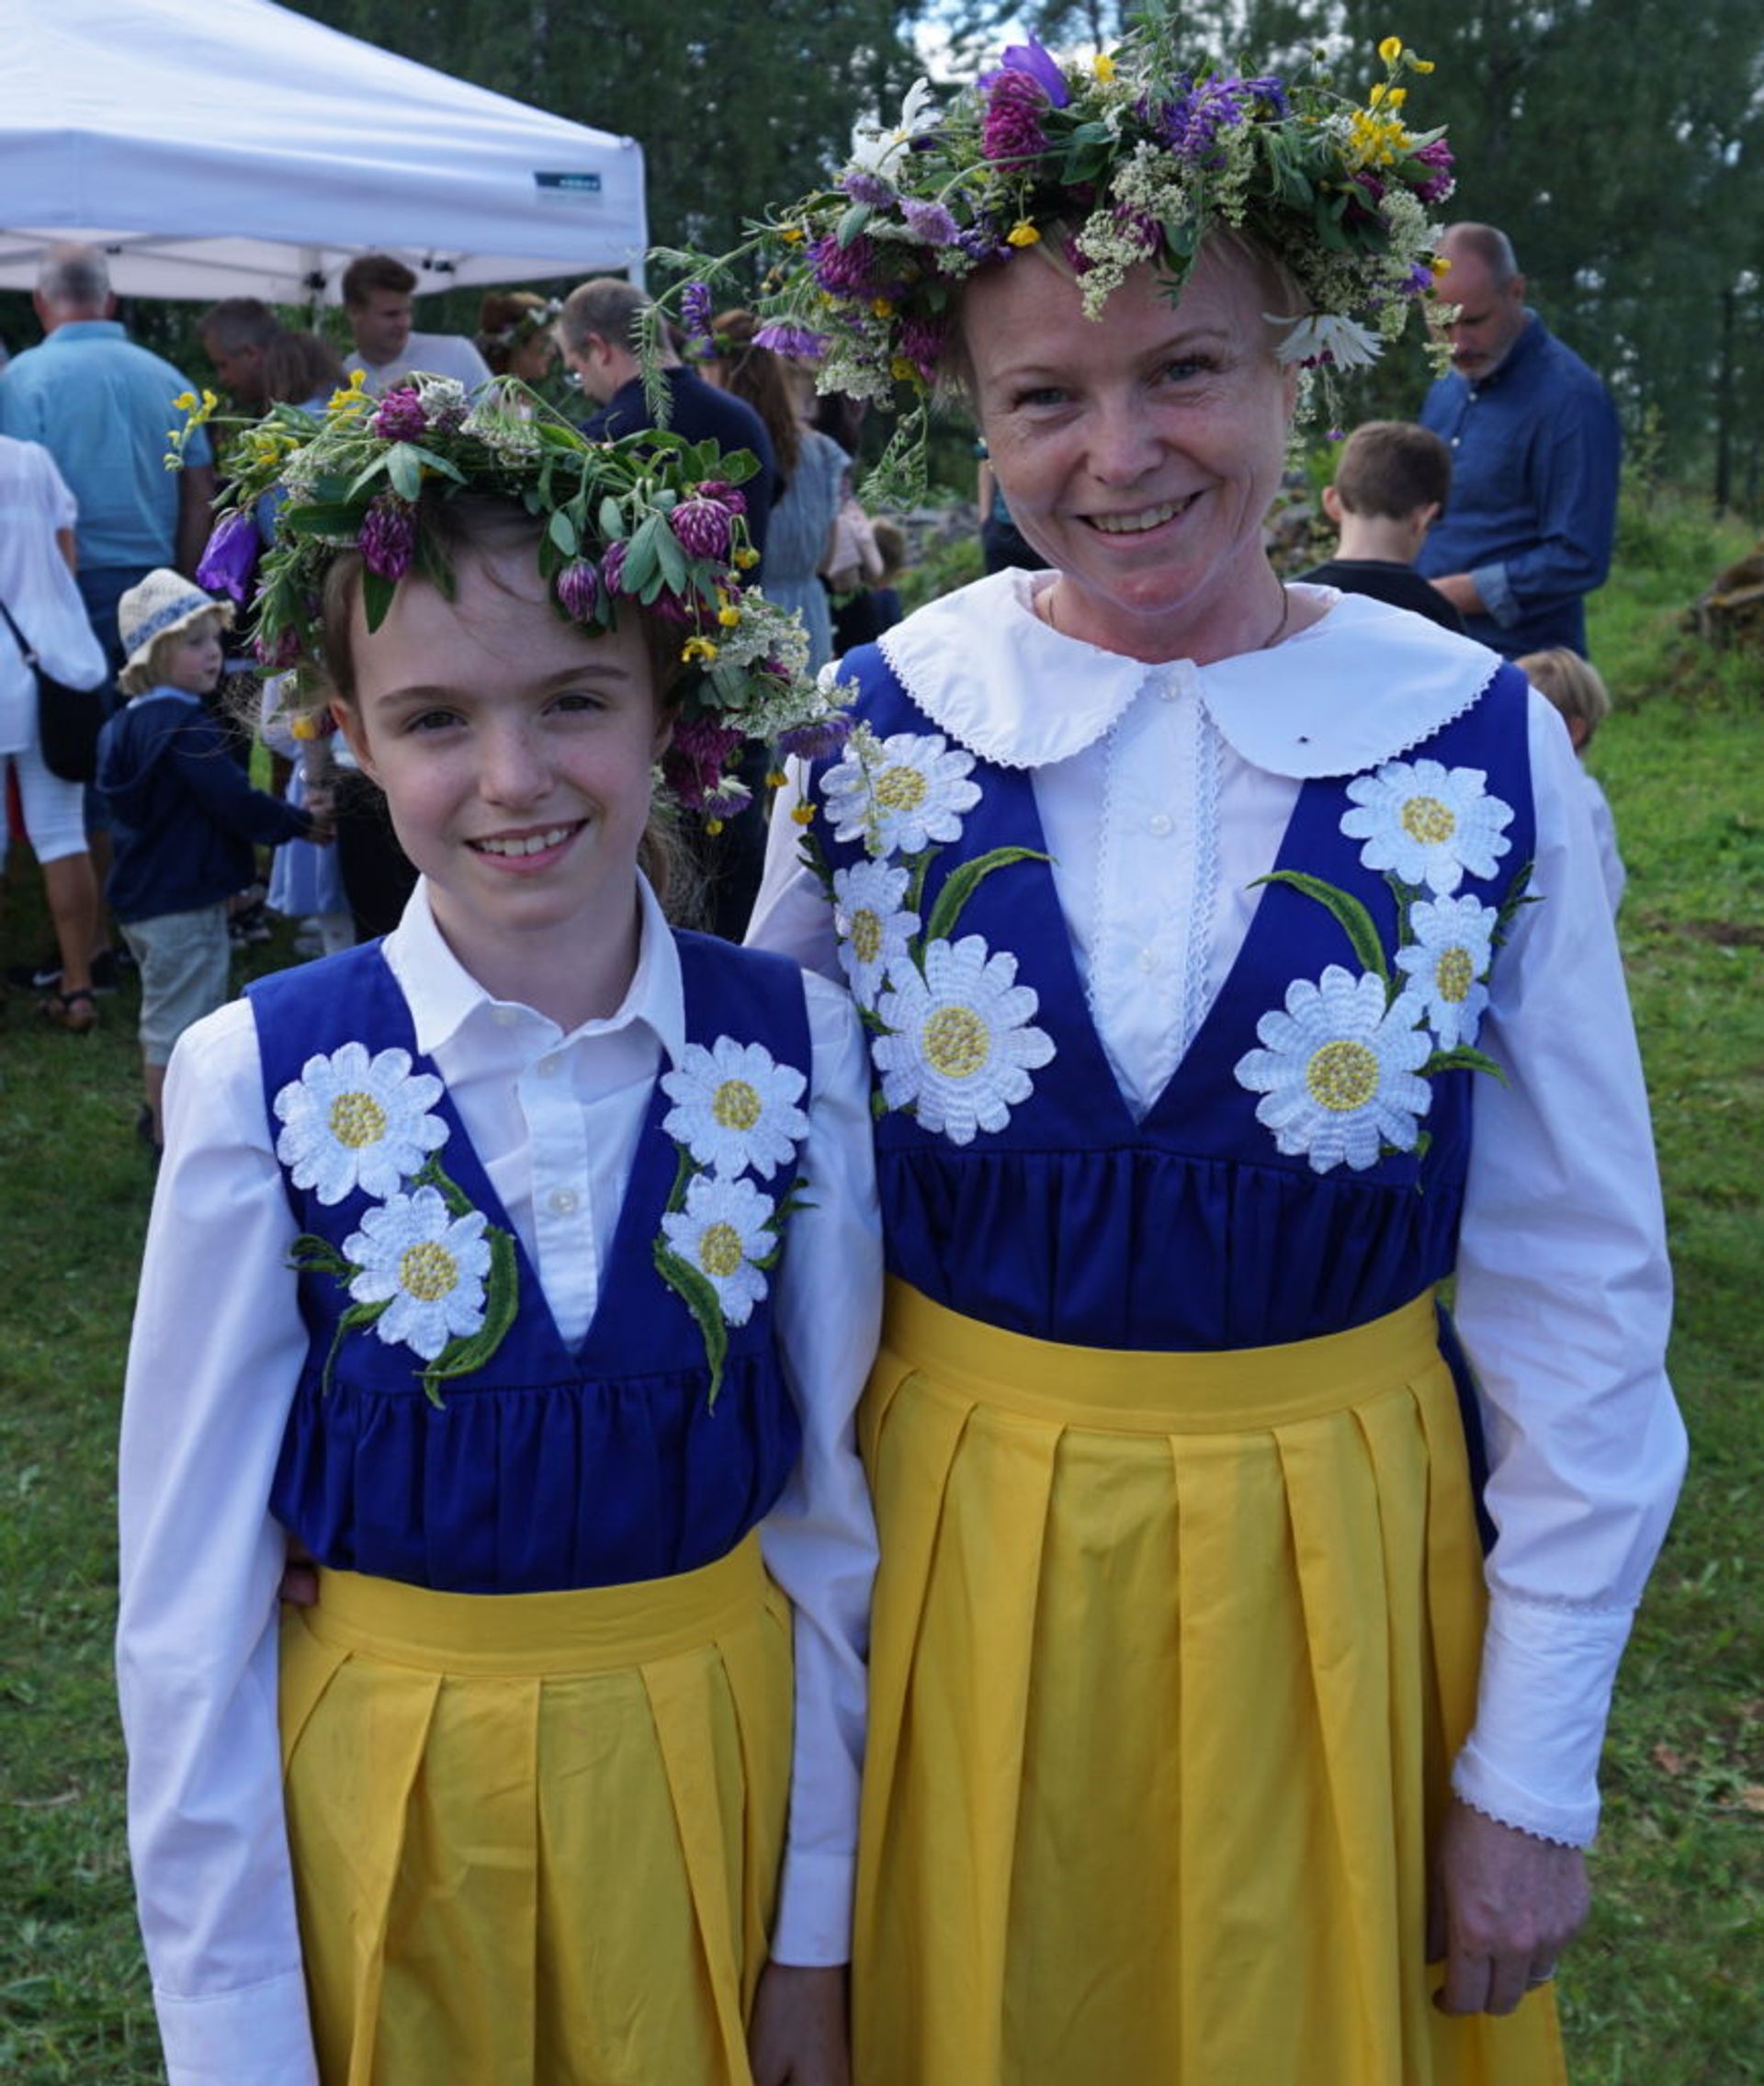 A mother and daughter wearing traditional folk costumes and flower crowns.